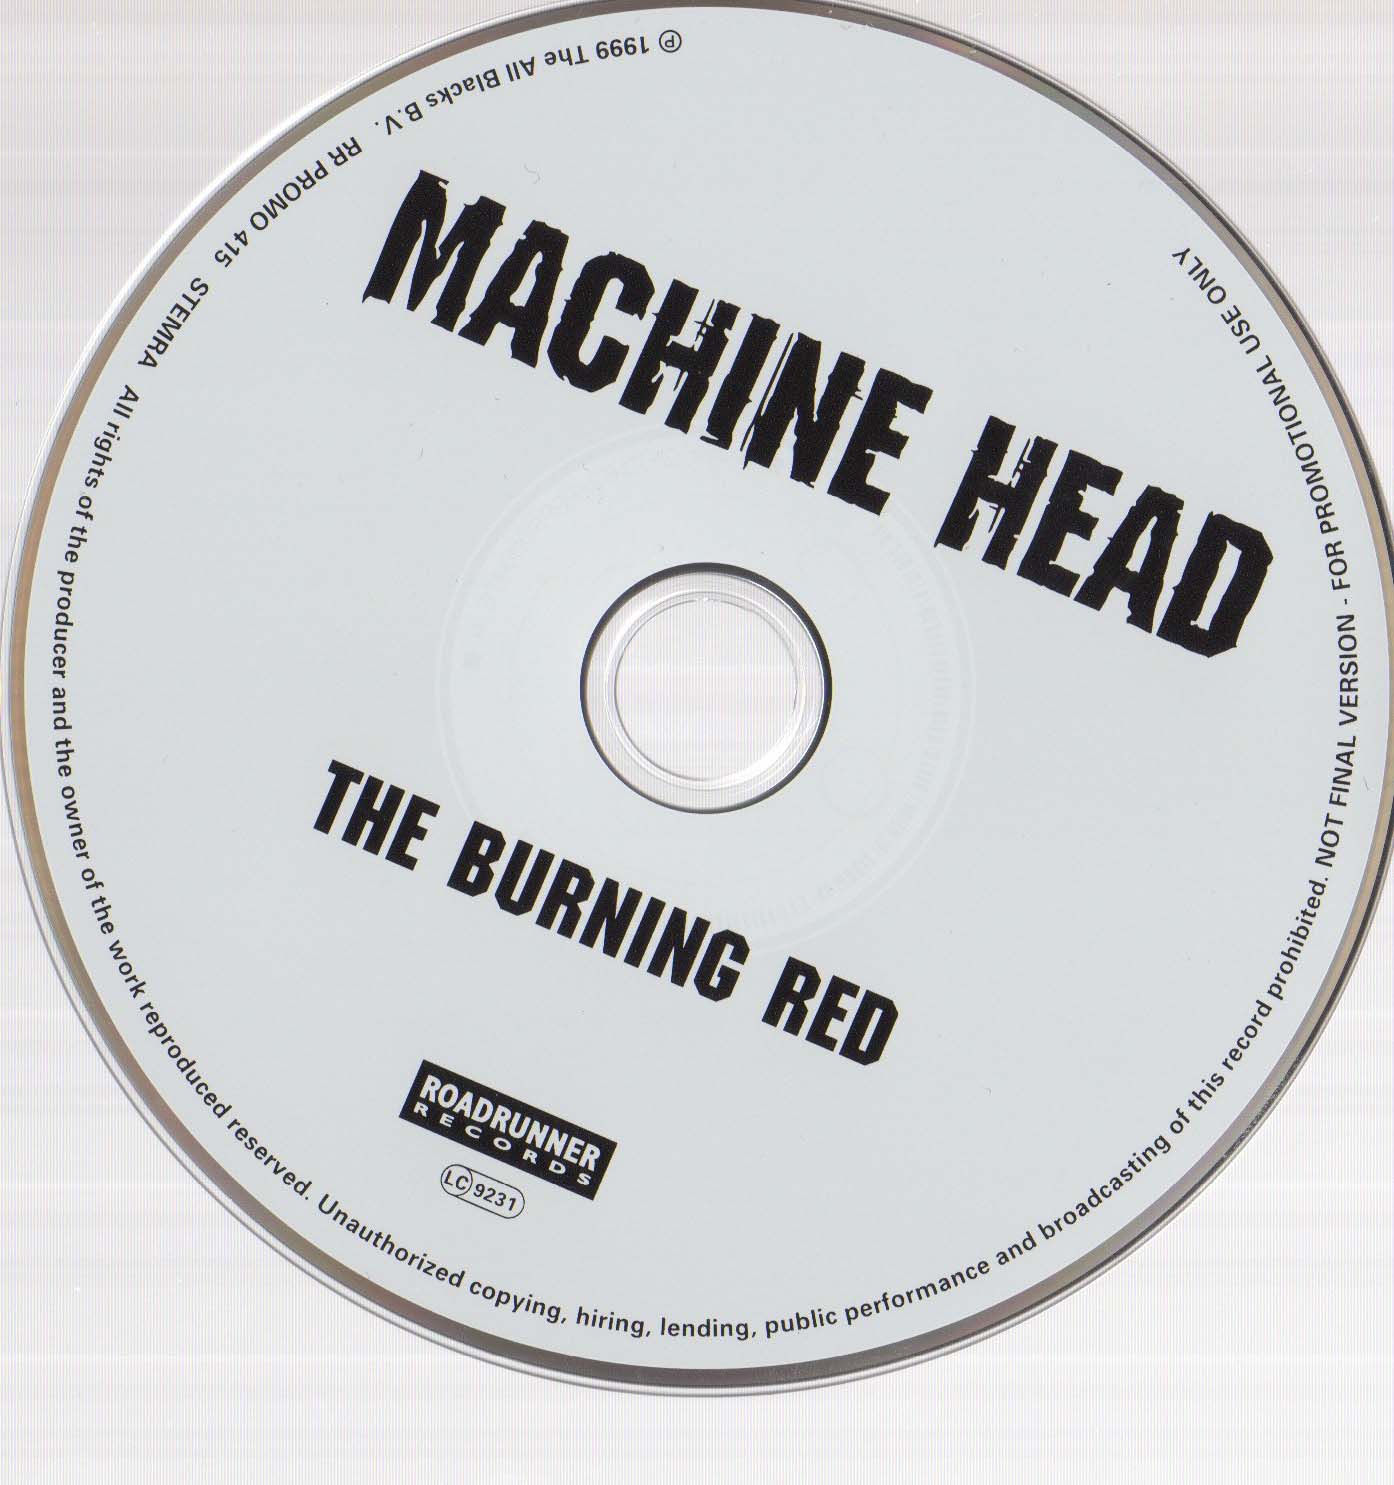 The Burning Red Card Sleeve Promo Disc